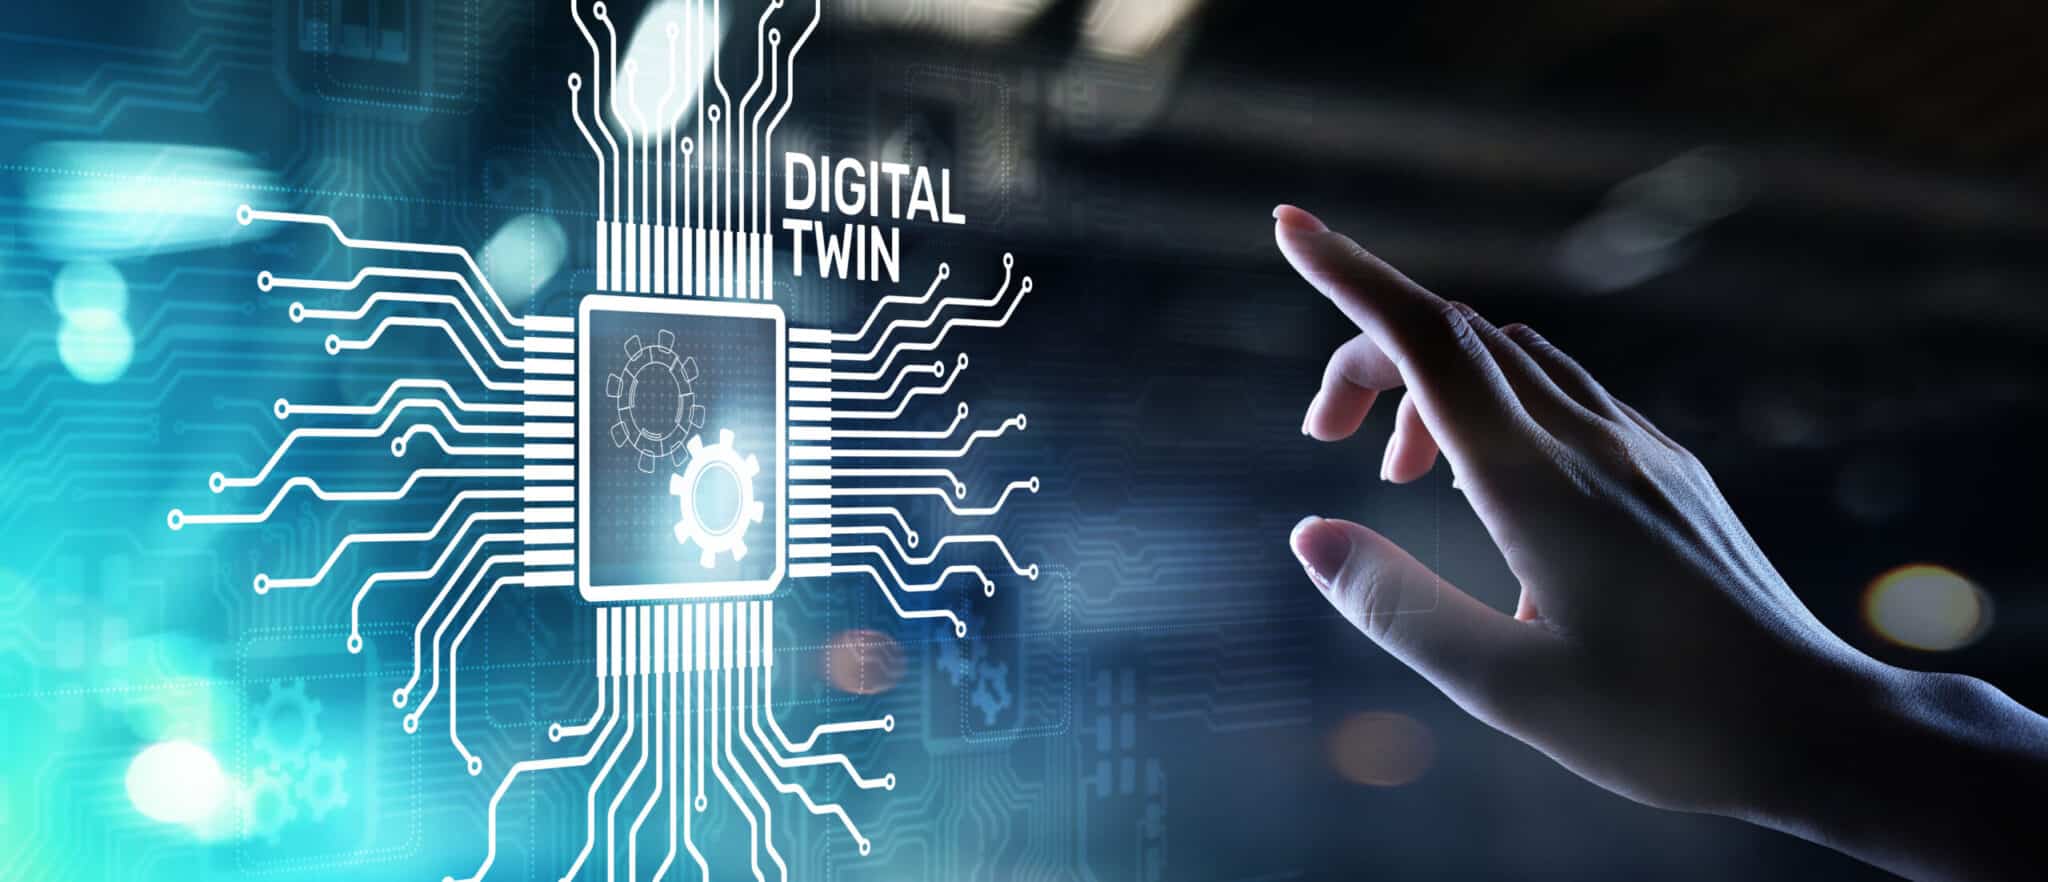 Digital Twins Transforming Manufacturing - Featured Image